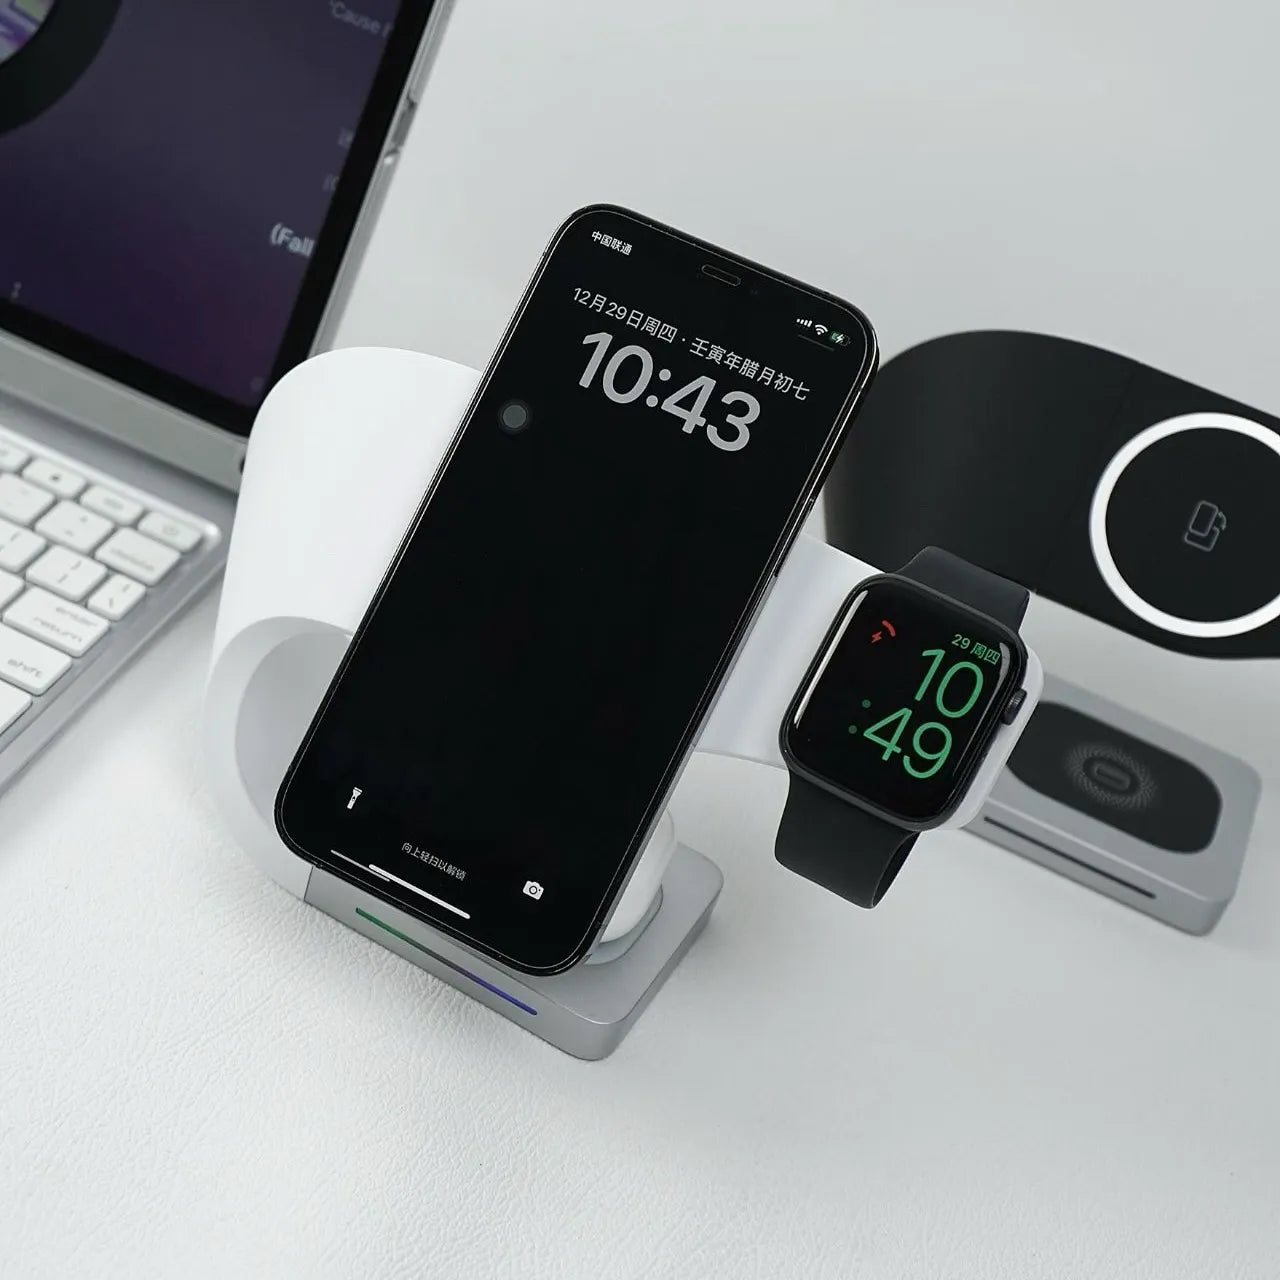 Wireless charging stand from OTOFLY